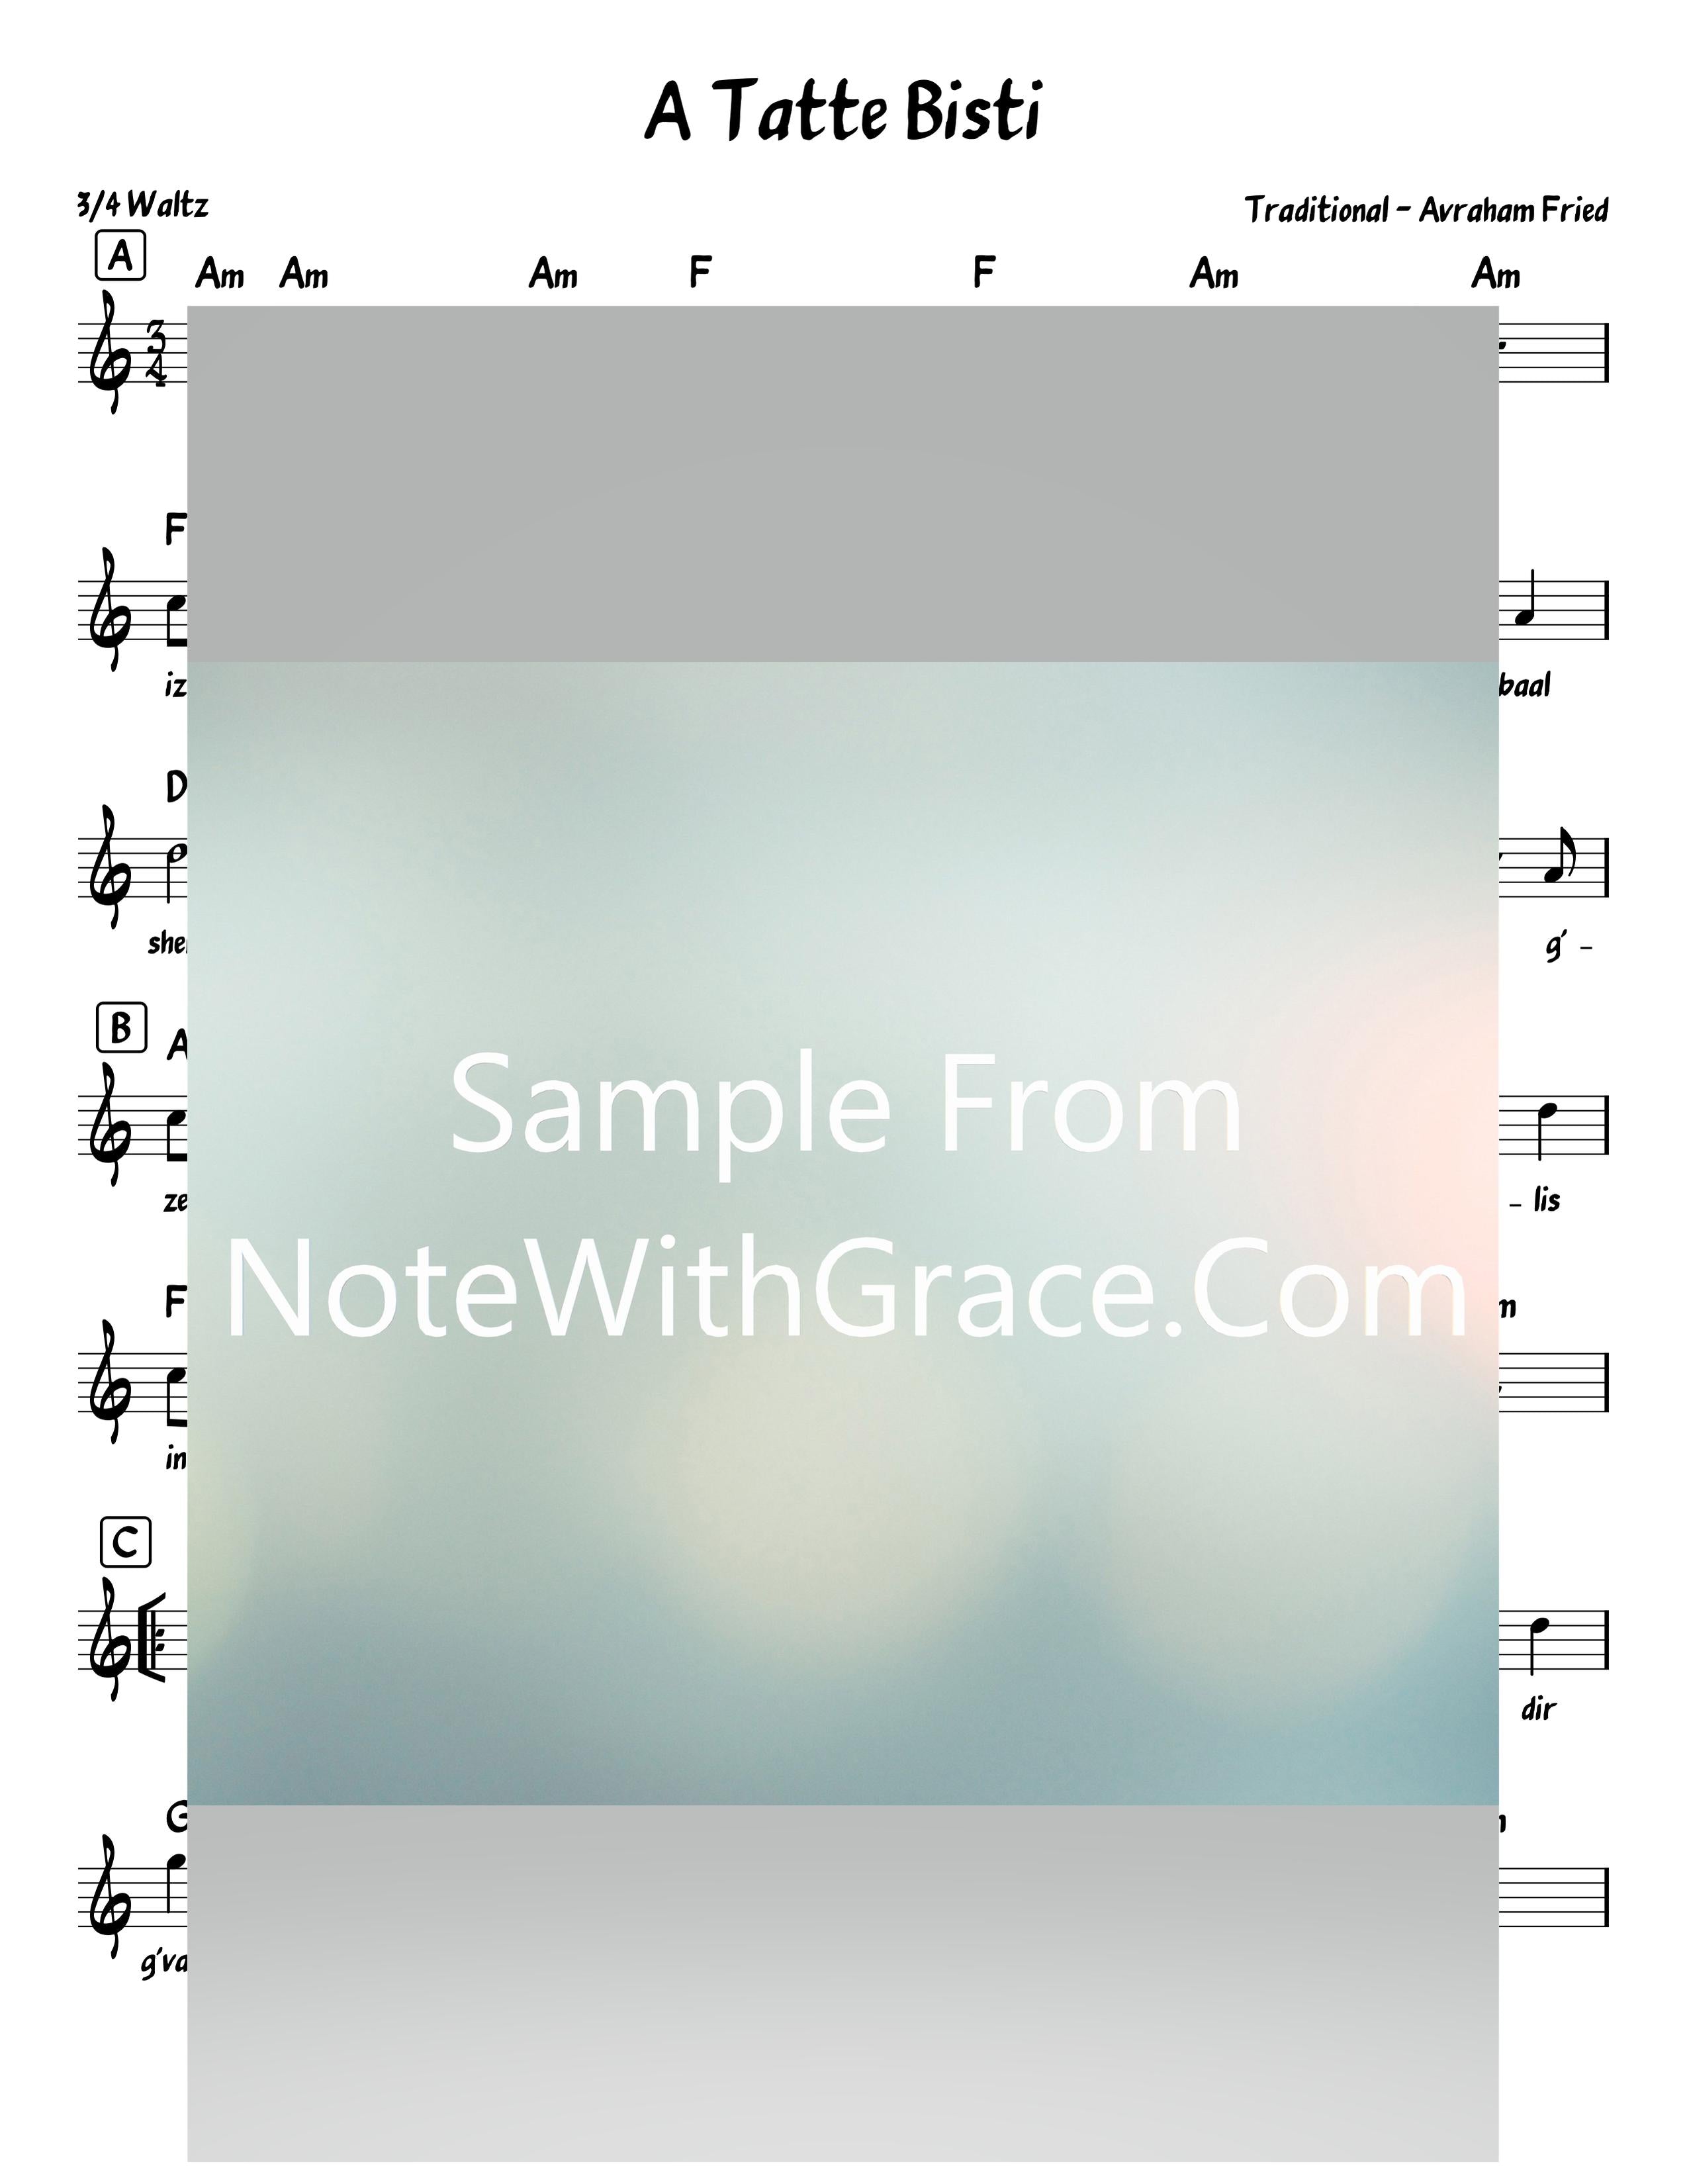 A Tatte Bisti - א טאטע ביסטו Lead Sheet (Traditional - Avrohom Fried) Album Forever One 2010-Sheet music-NoteWithGrace.com